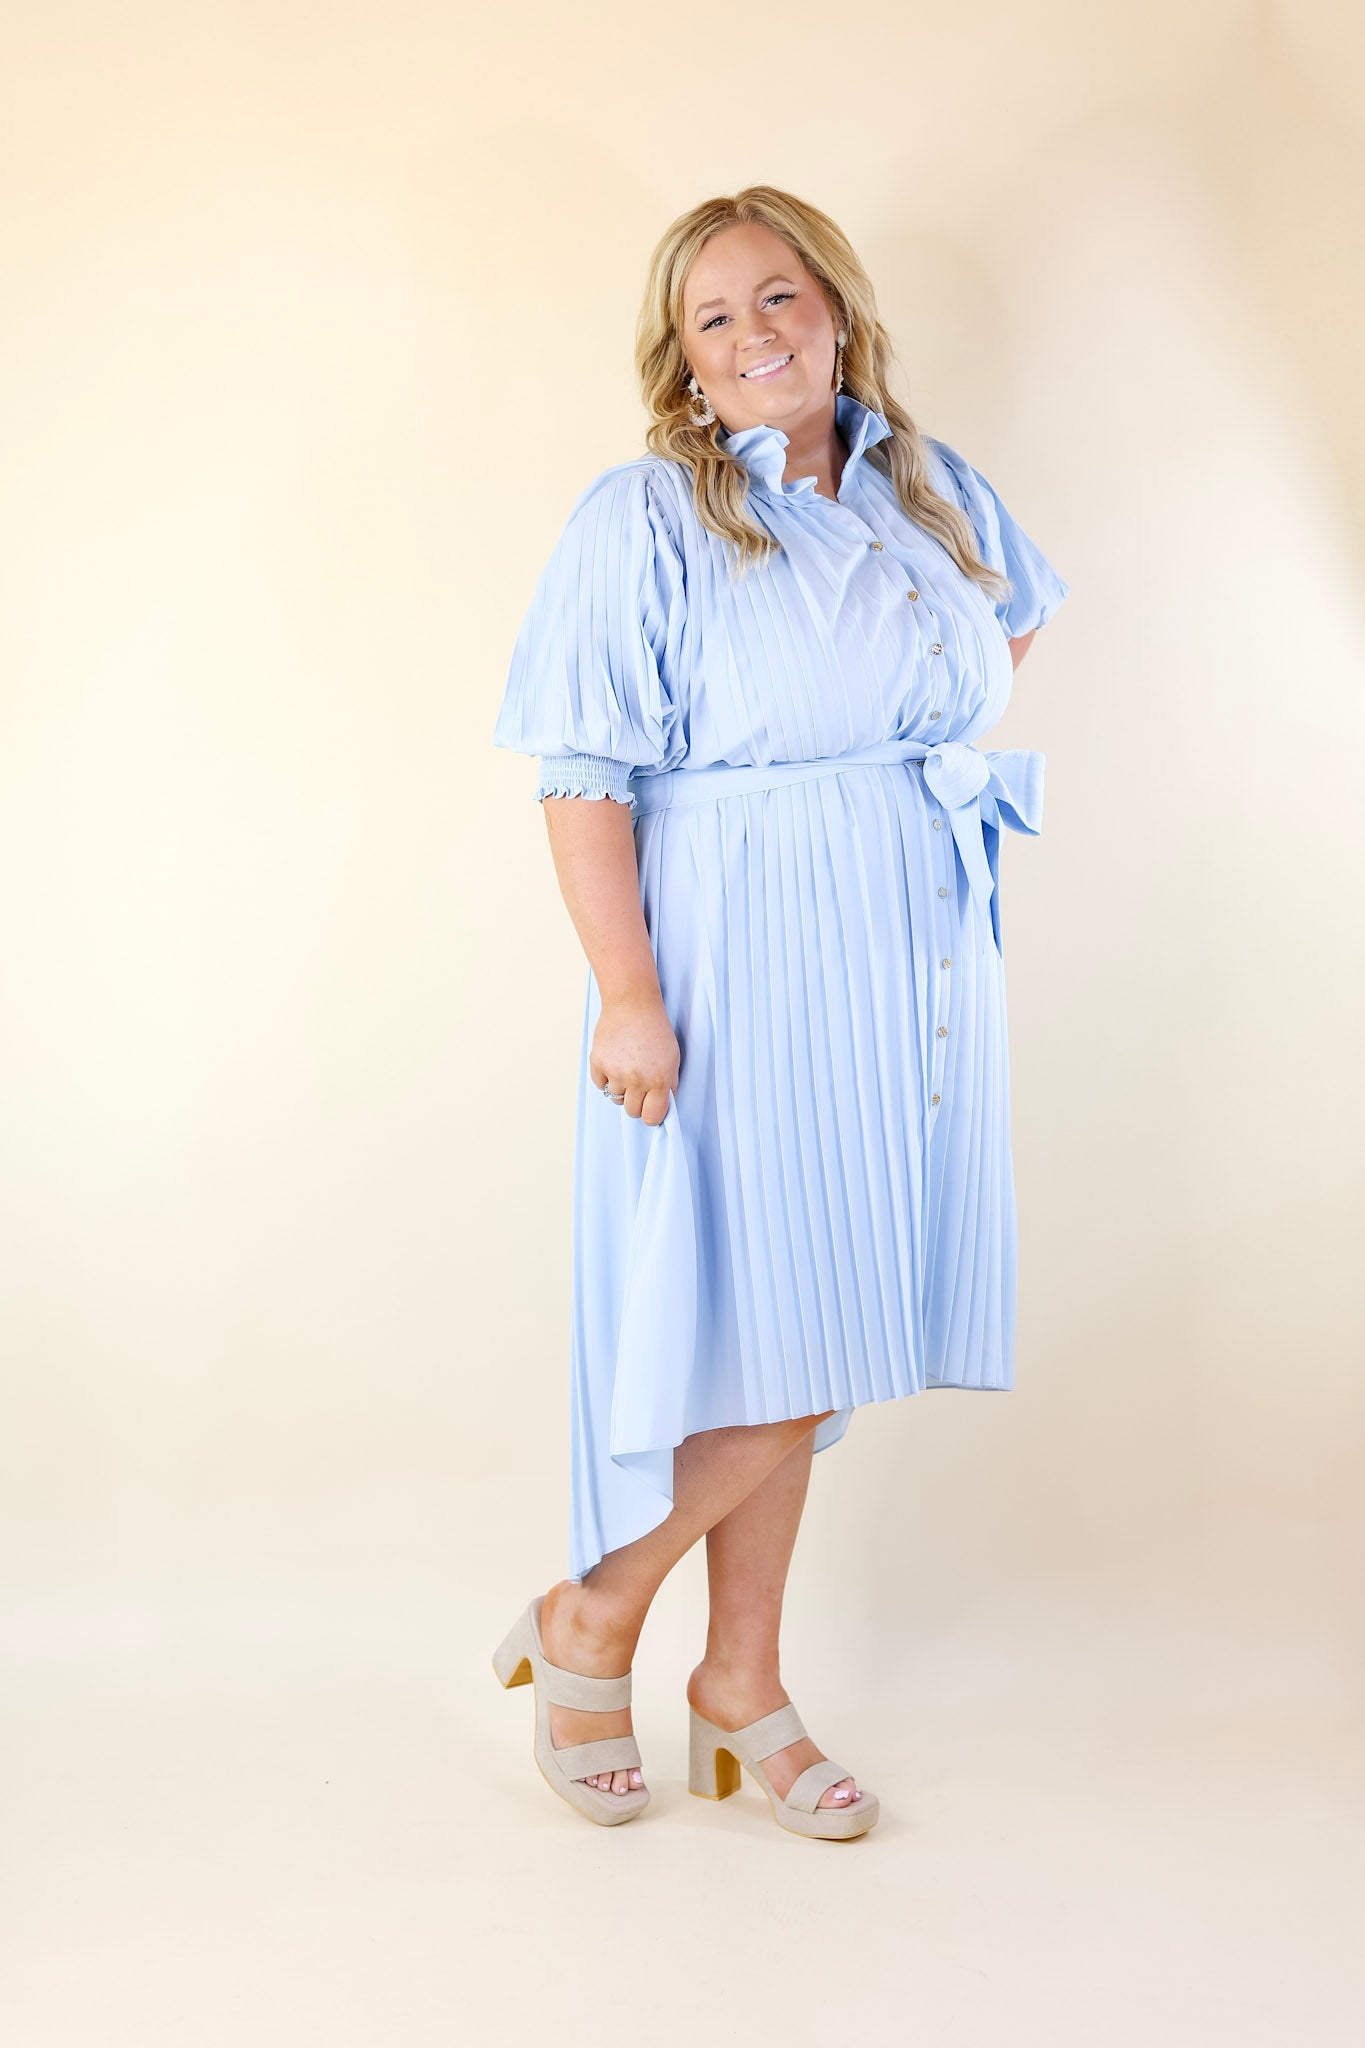 Emily McCarthy | Rowan Dress in Sail (Light Blue) - Giddy Up Glamour Boutique